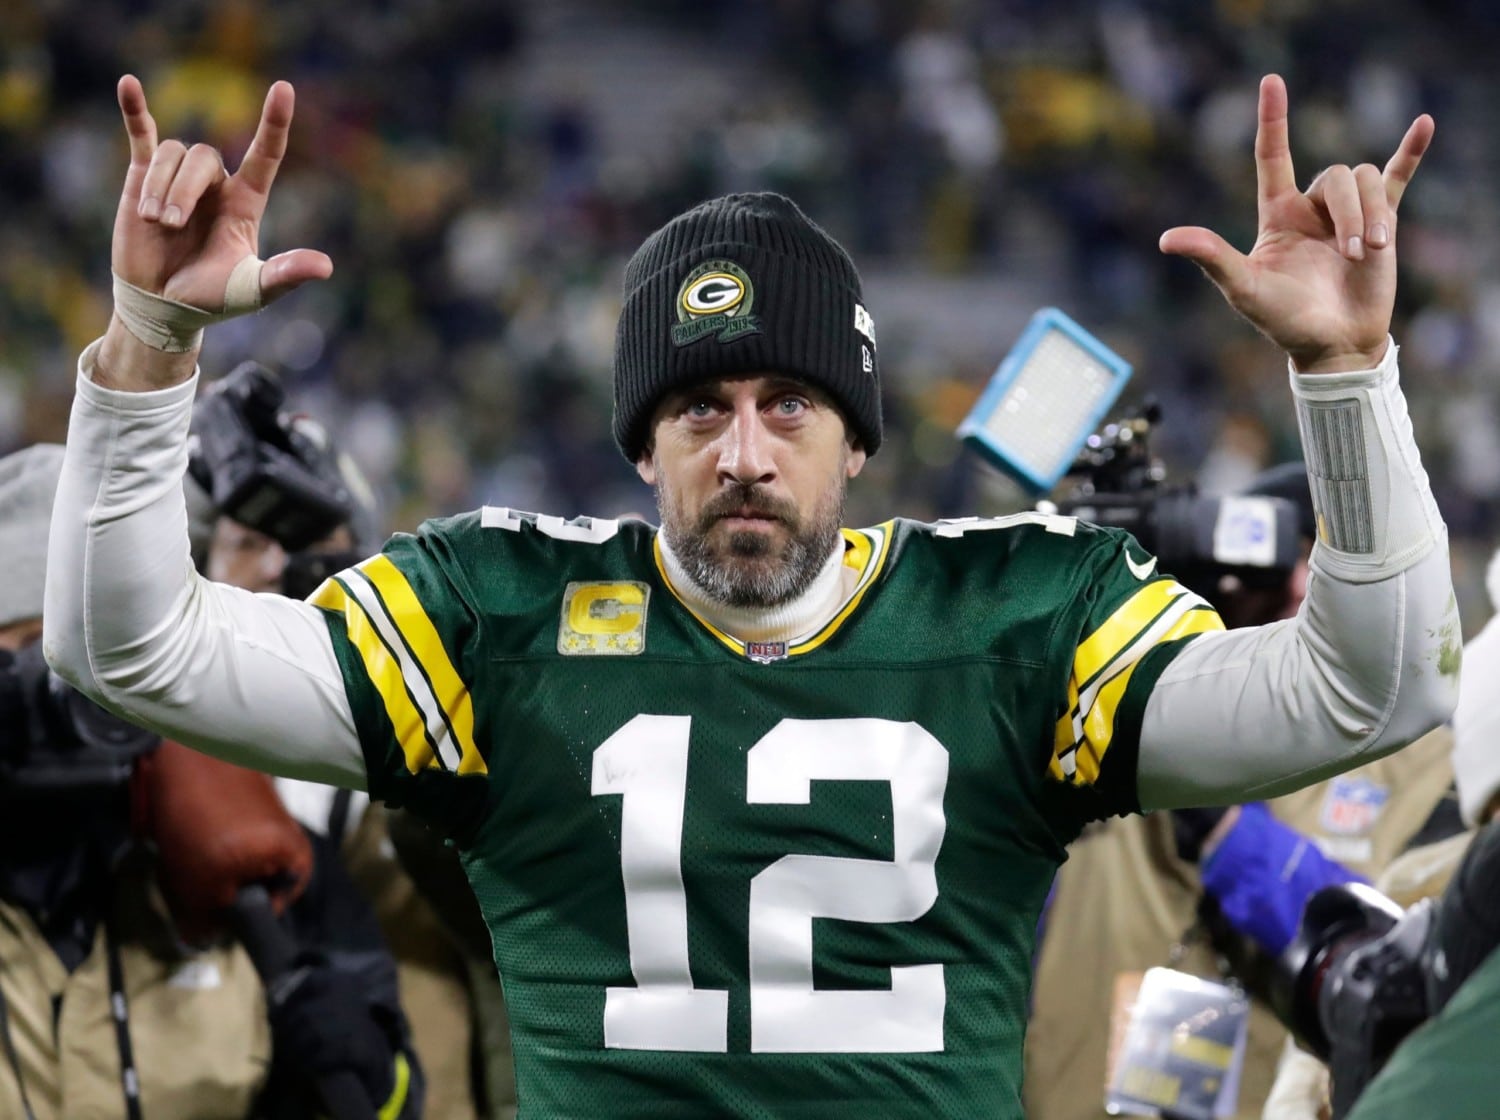 Green Bay Packers quarterback Aaron Rodgers walks off field while being surrounded by photographers